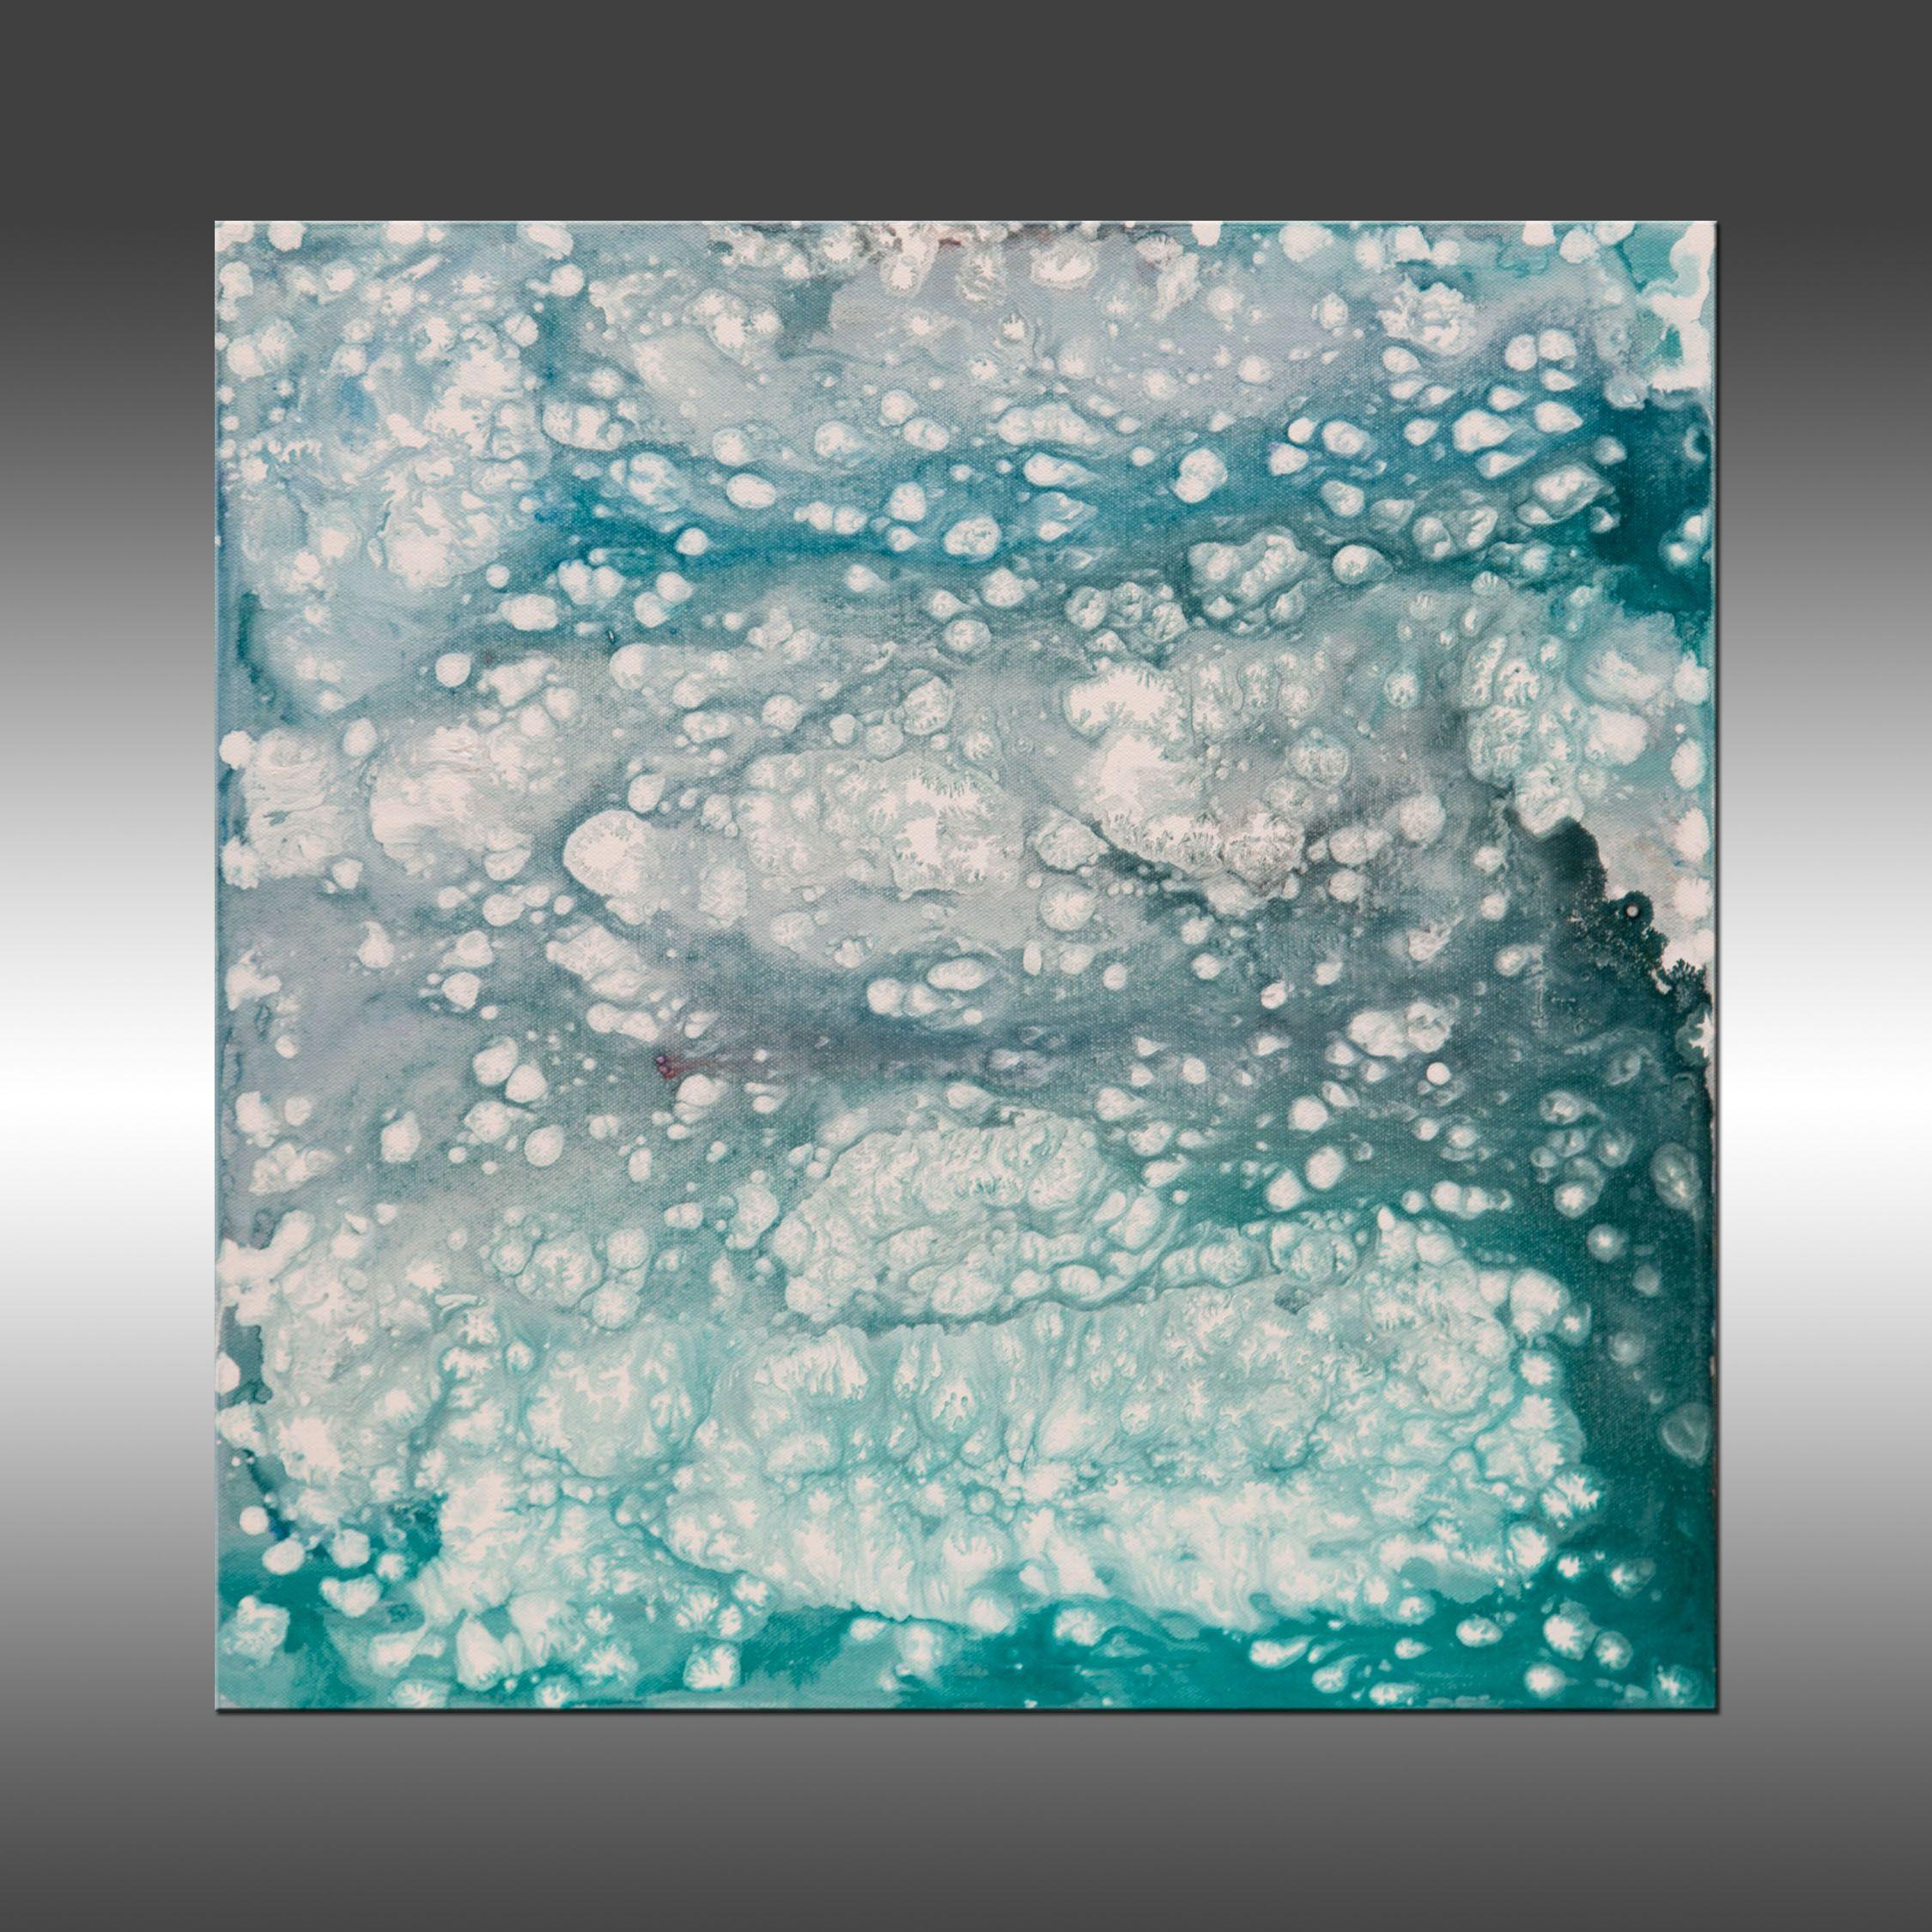 Aquamarine is an original painting, created with acrylic paint on gallery-wrapped canvas. It has a width of 20 inches and a height of 20 inches with a depth of 1.5 inches (20x20x1.5).     The colors used in the painting are white, blue, teal, gray